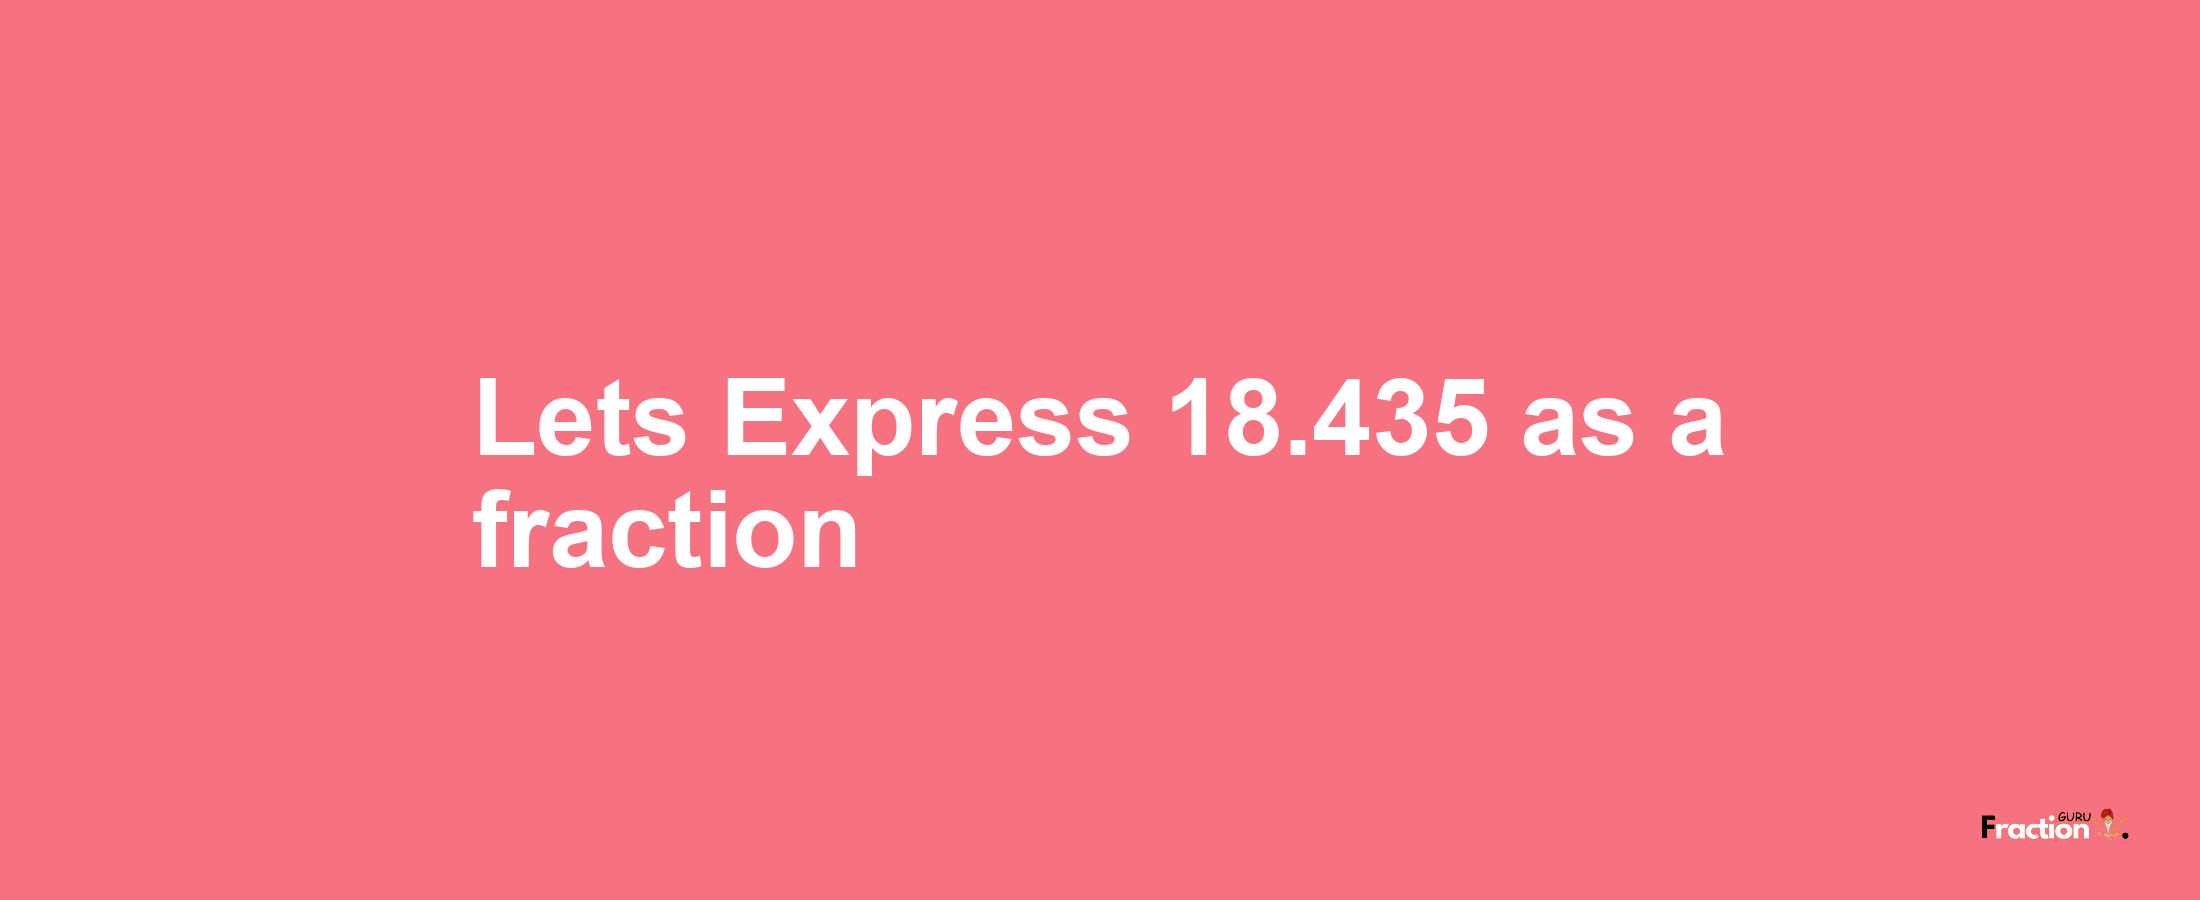 Lets Express 18.435 as afraction